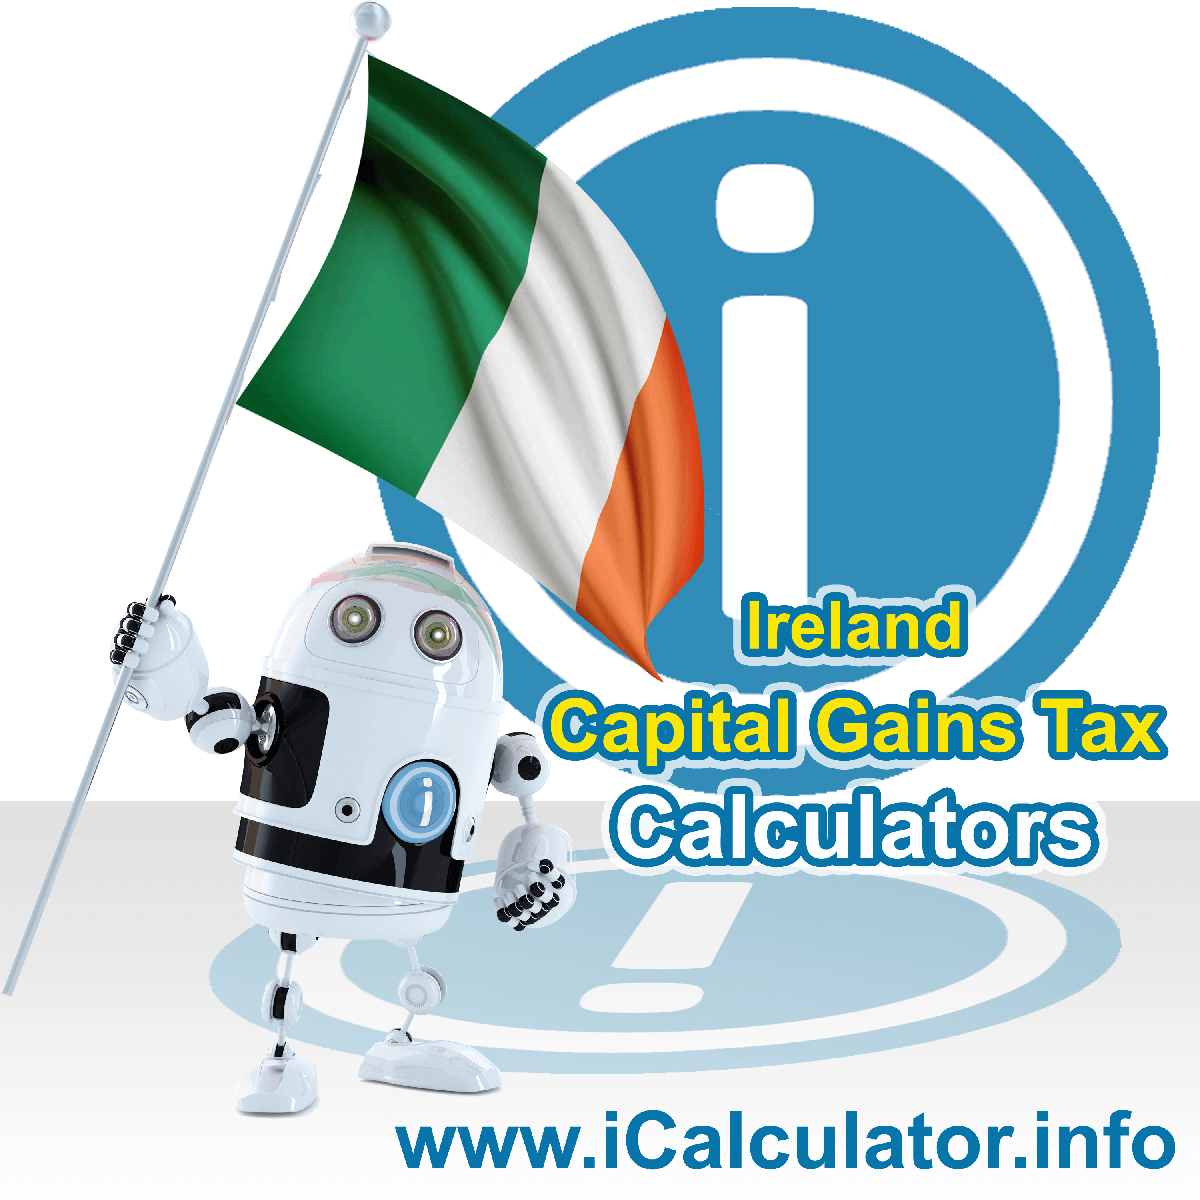 Ireland Capital Gains Tax Calculator. This image shows the Ireland flag and information relating to the capital gains tax rate formula used for calculating Capital Gains Tax in Ireland using the Ireland Capital Gains Tax Calculator in 2023